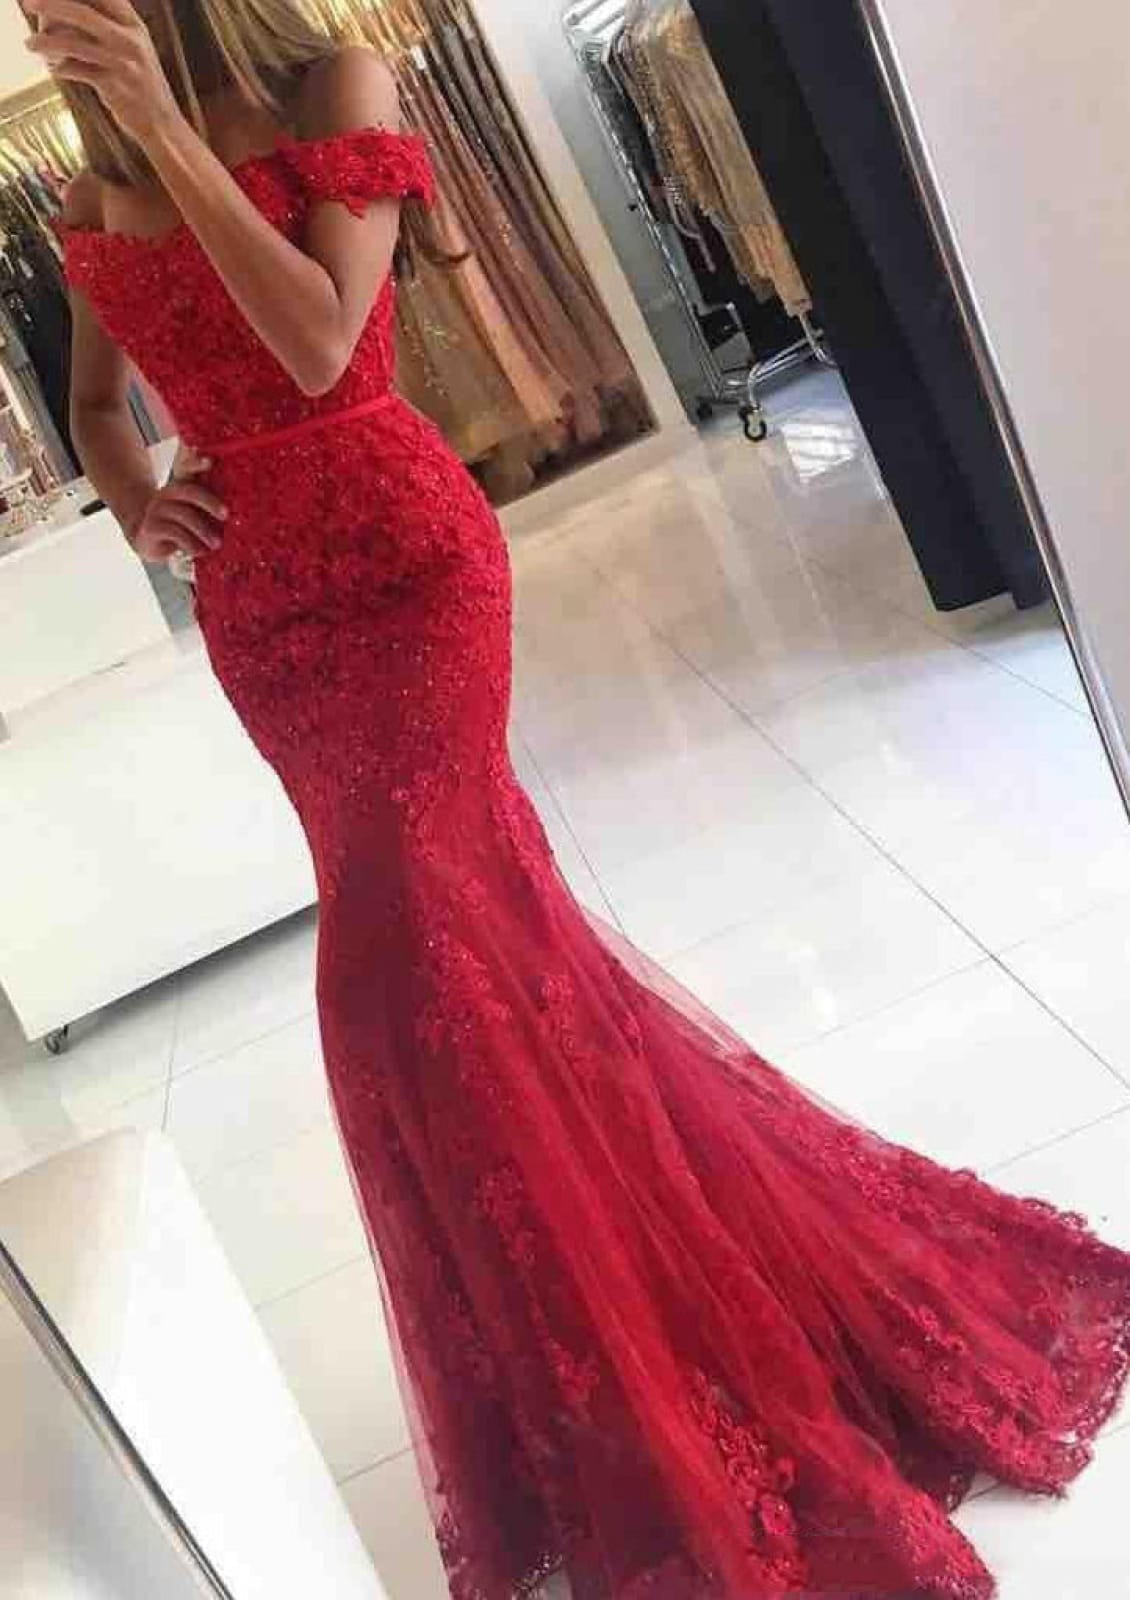 Lace Tulle Off Shoulder Sweep Train Long Mermaid Formal Gown Prom Dress, Beaded